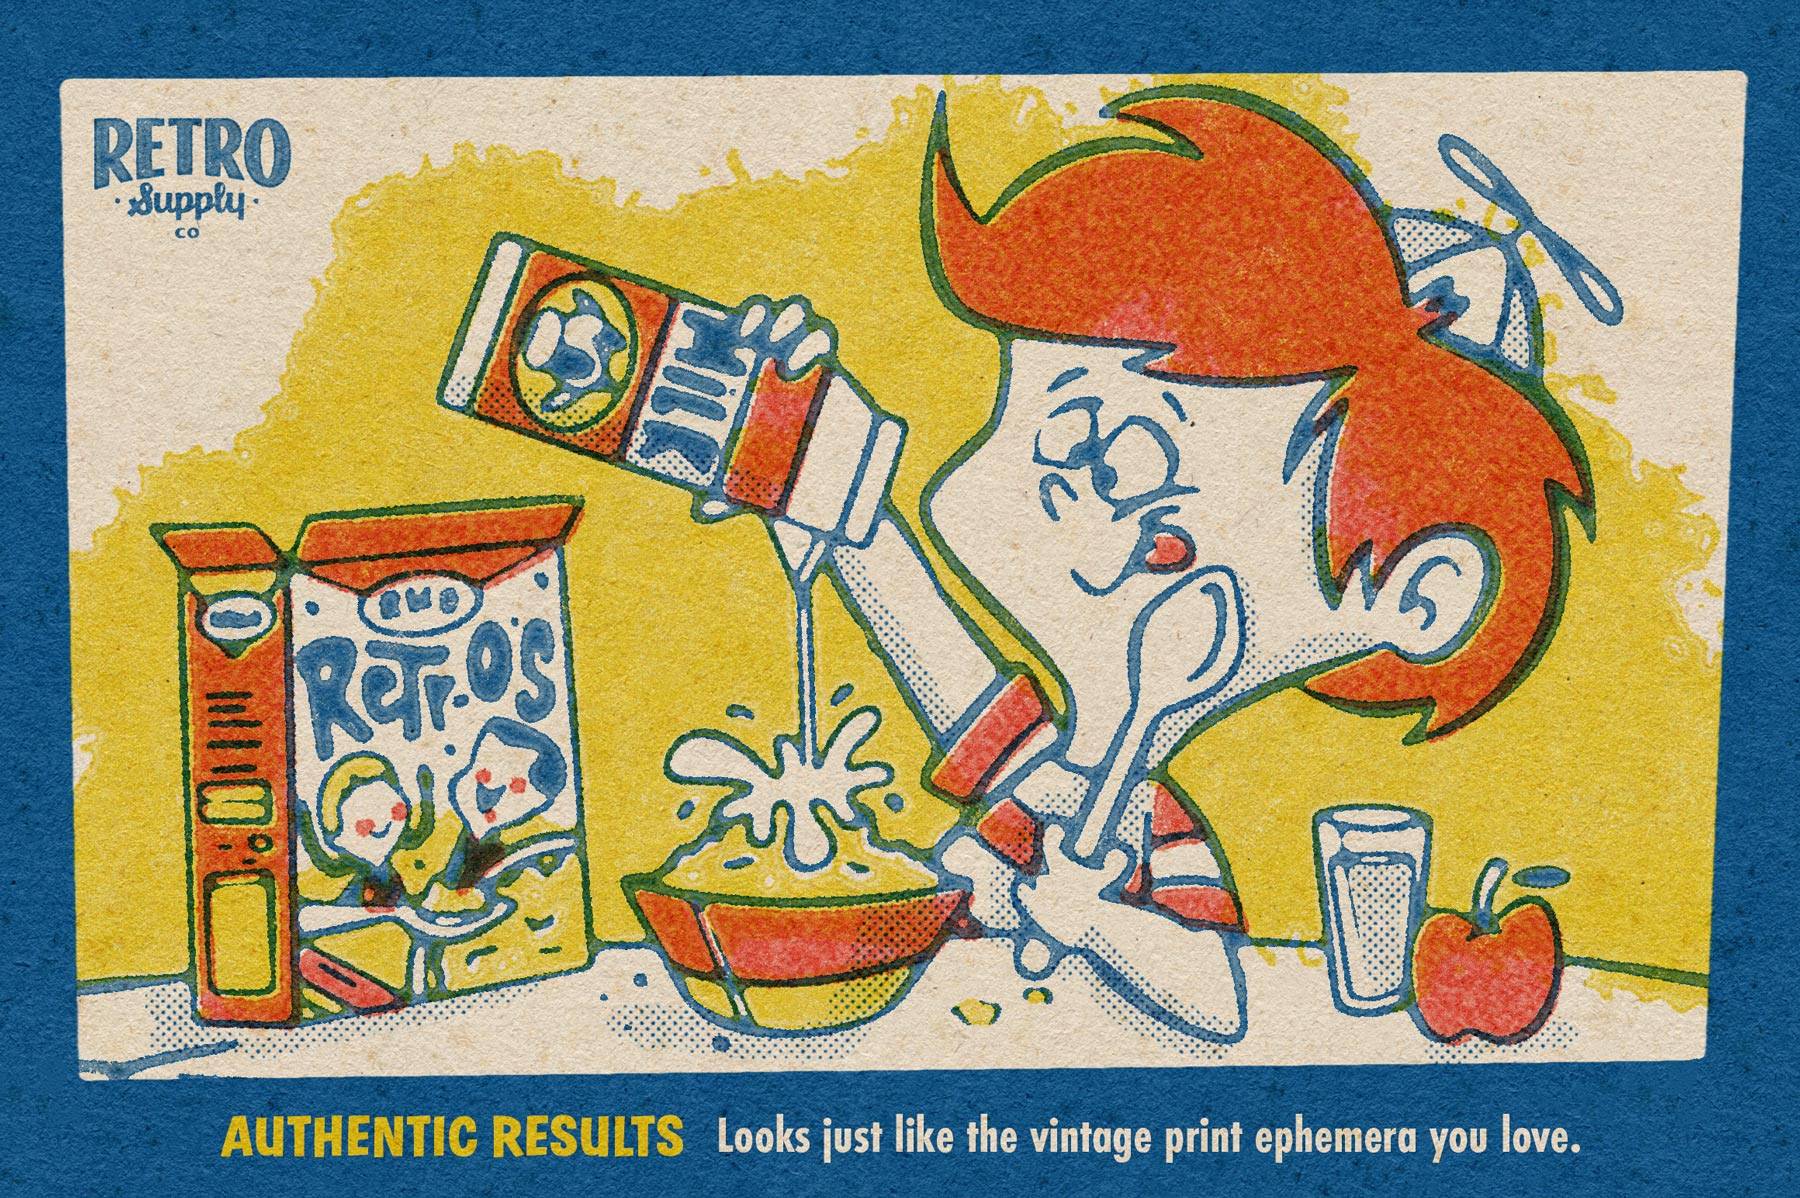 An illustration of a child pouring milk on cereal in blue, yellow, and red.